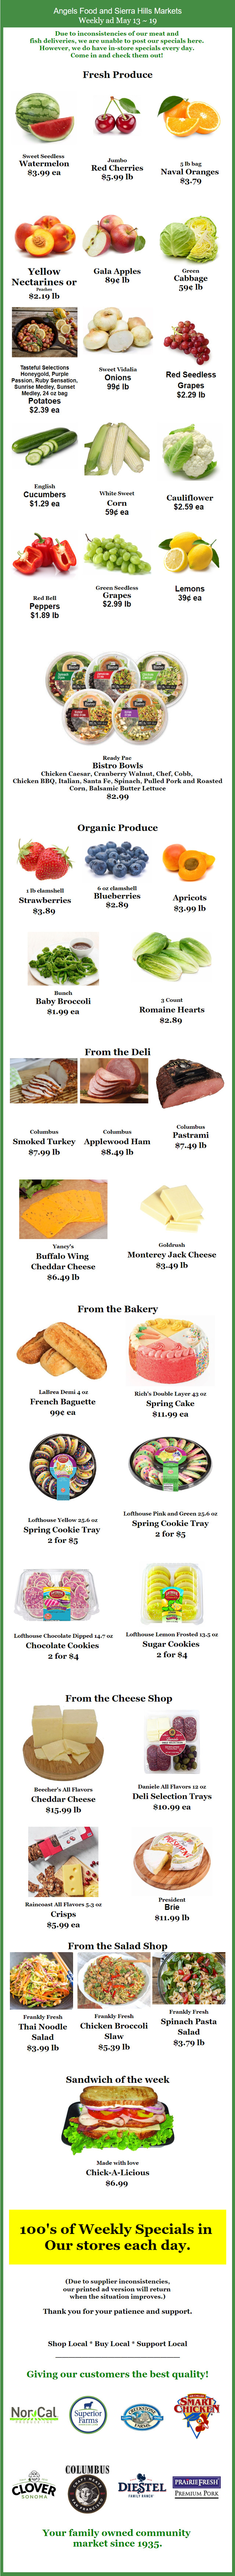 Angels Food and Sierra Hills Markets Weekly Ad & Specials Through May 19th